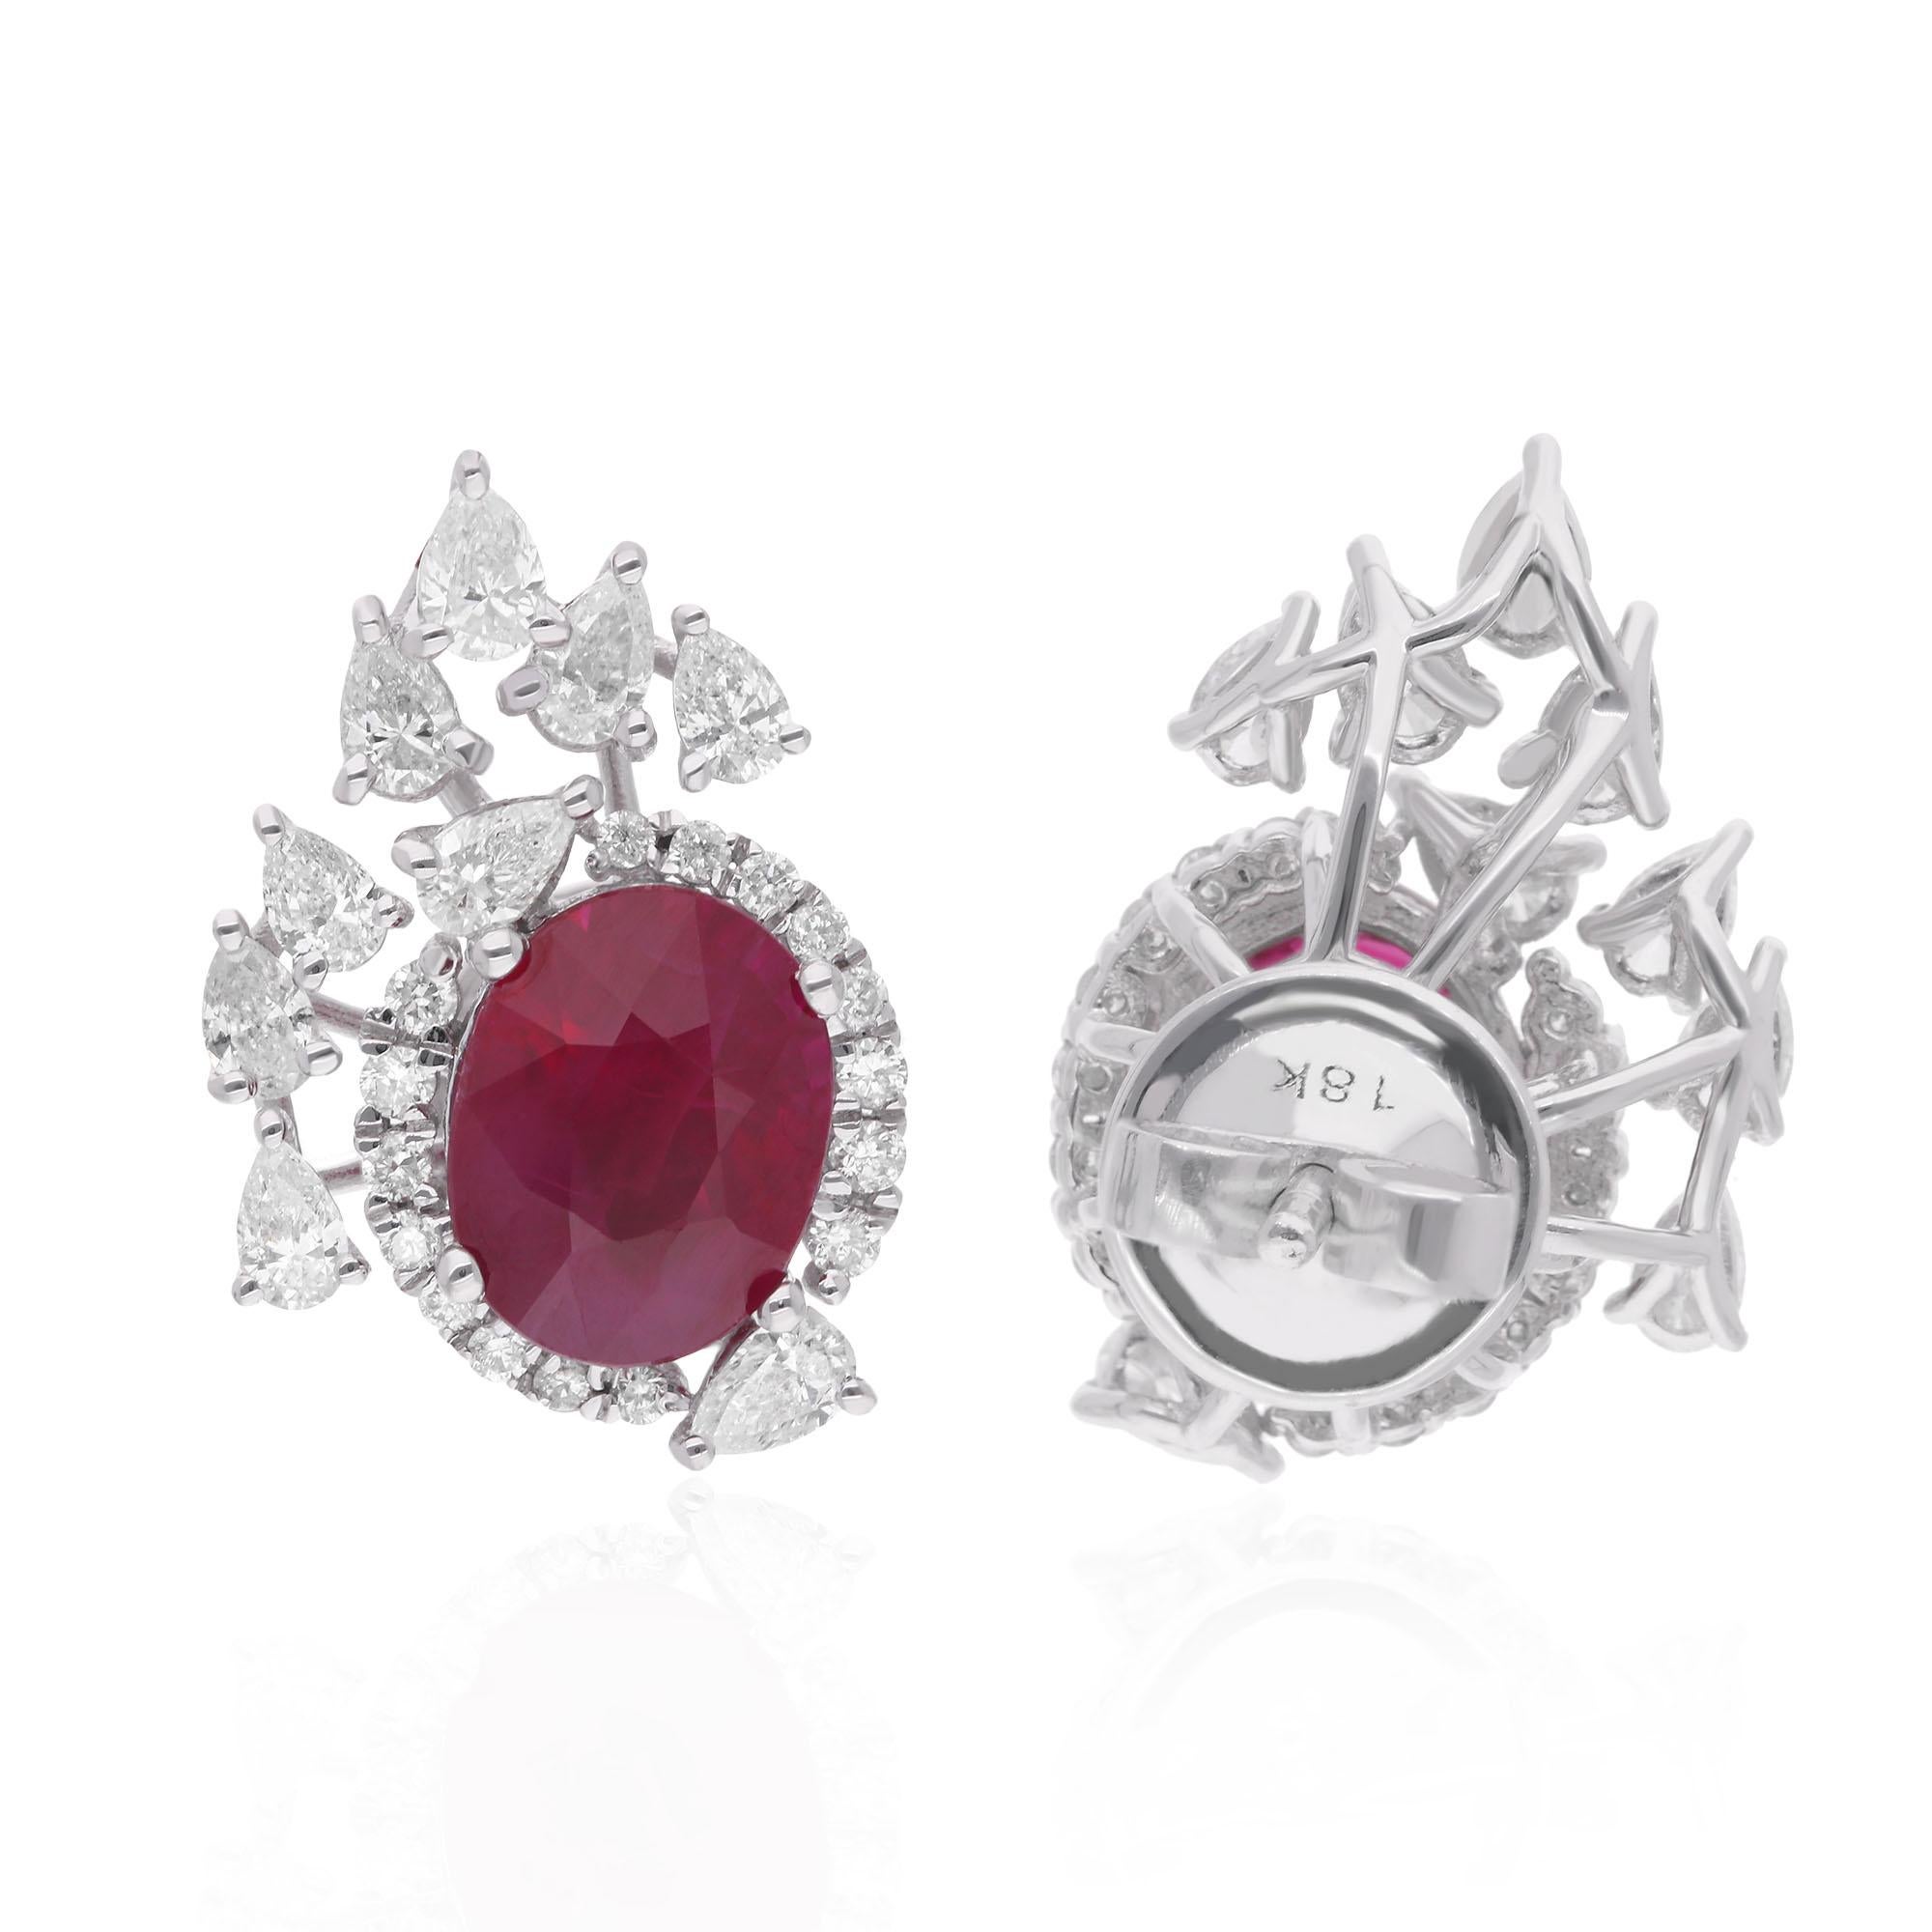 Adorn your ears with the timeless elegance of our Oval Ruby Gemstone Stud Earrings, a captivating blend of sophistication and luxury. Handcrafted with meticulous care from 18 karat white gold, these earrings feature exquisite oval ruby gemstones